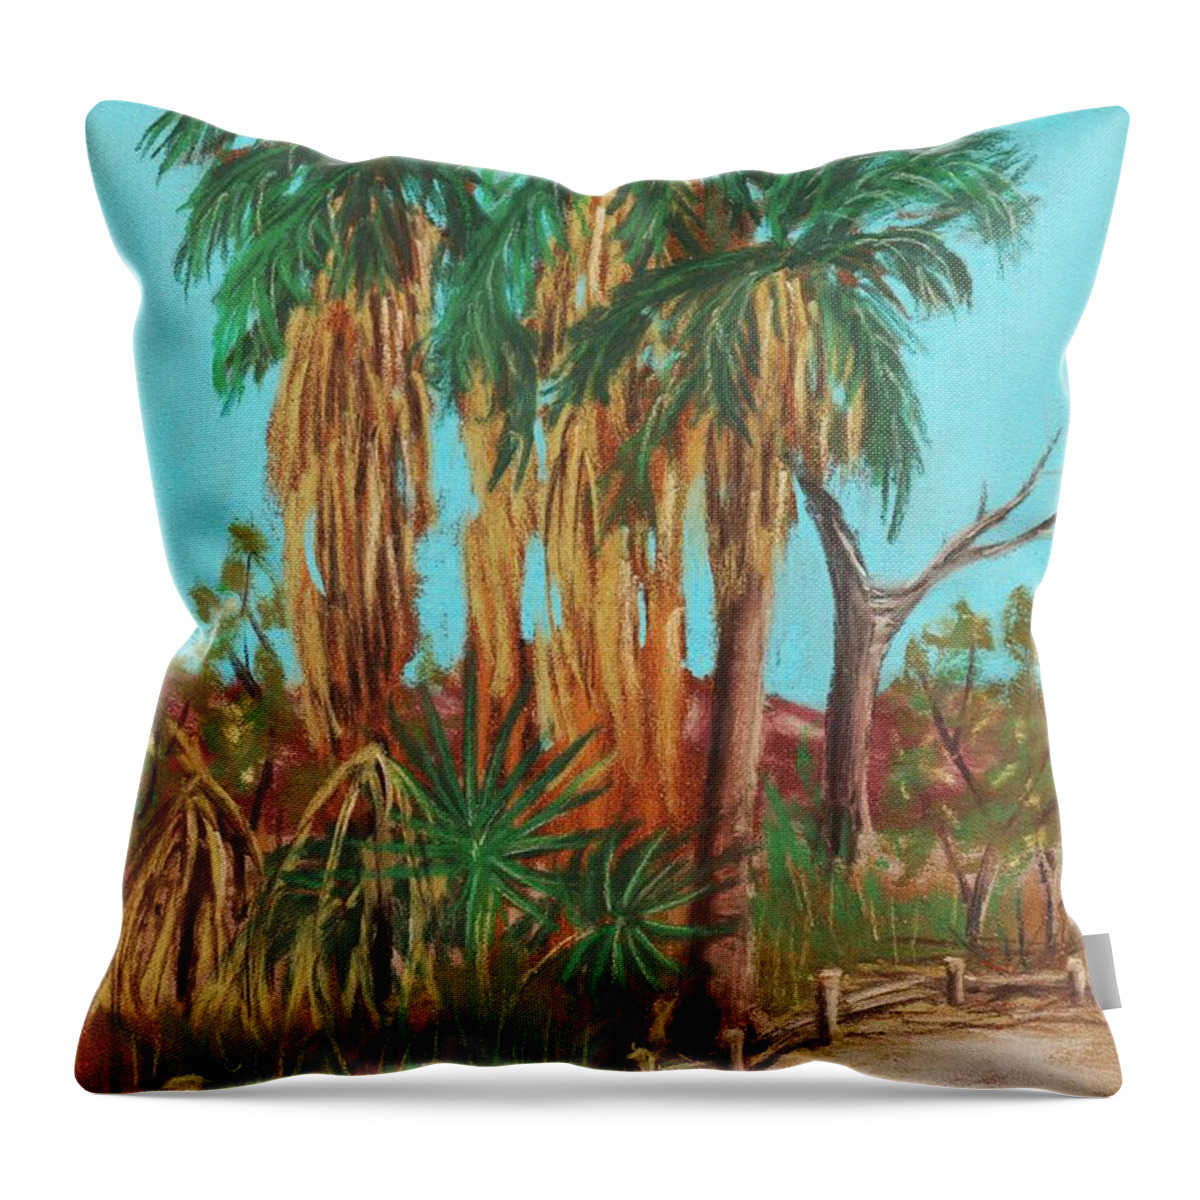 Plant Throw Pillow featuring the painting Oasis by Anastasiya Malakhova